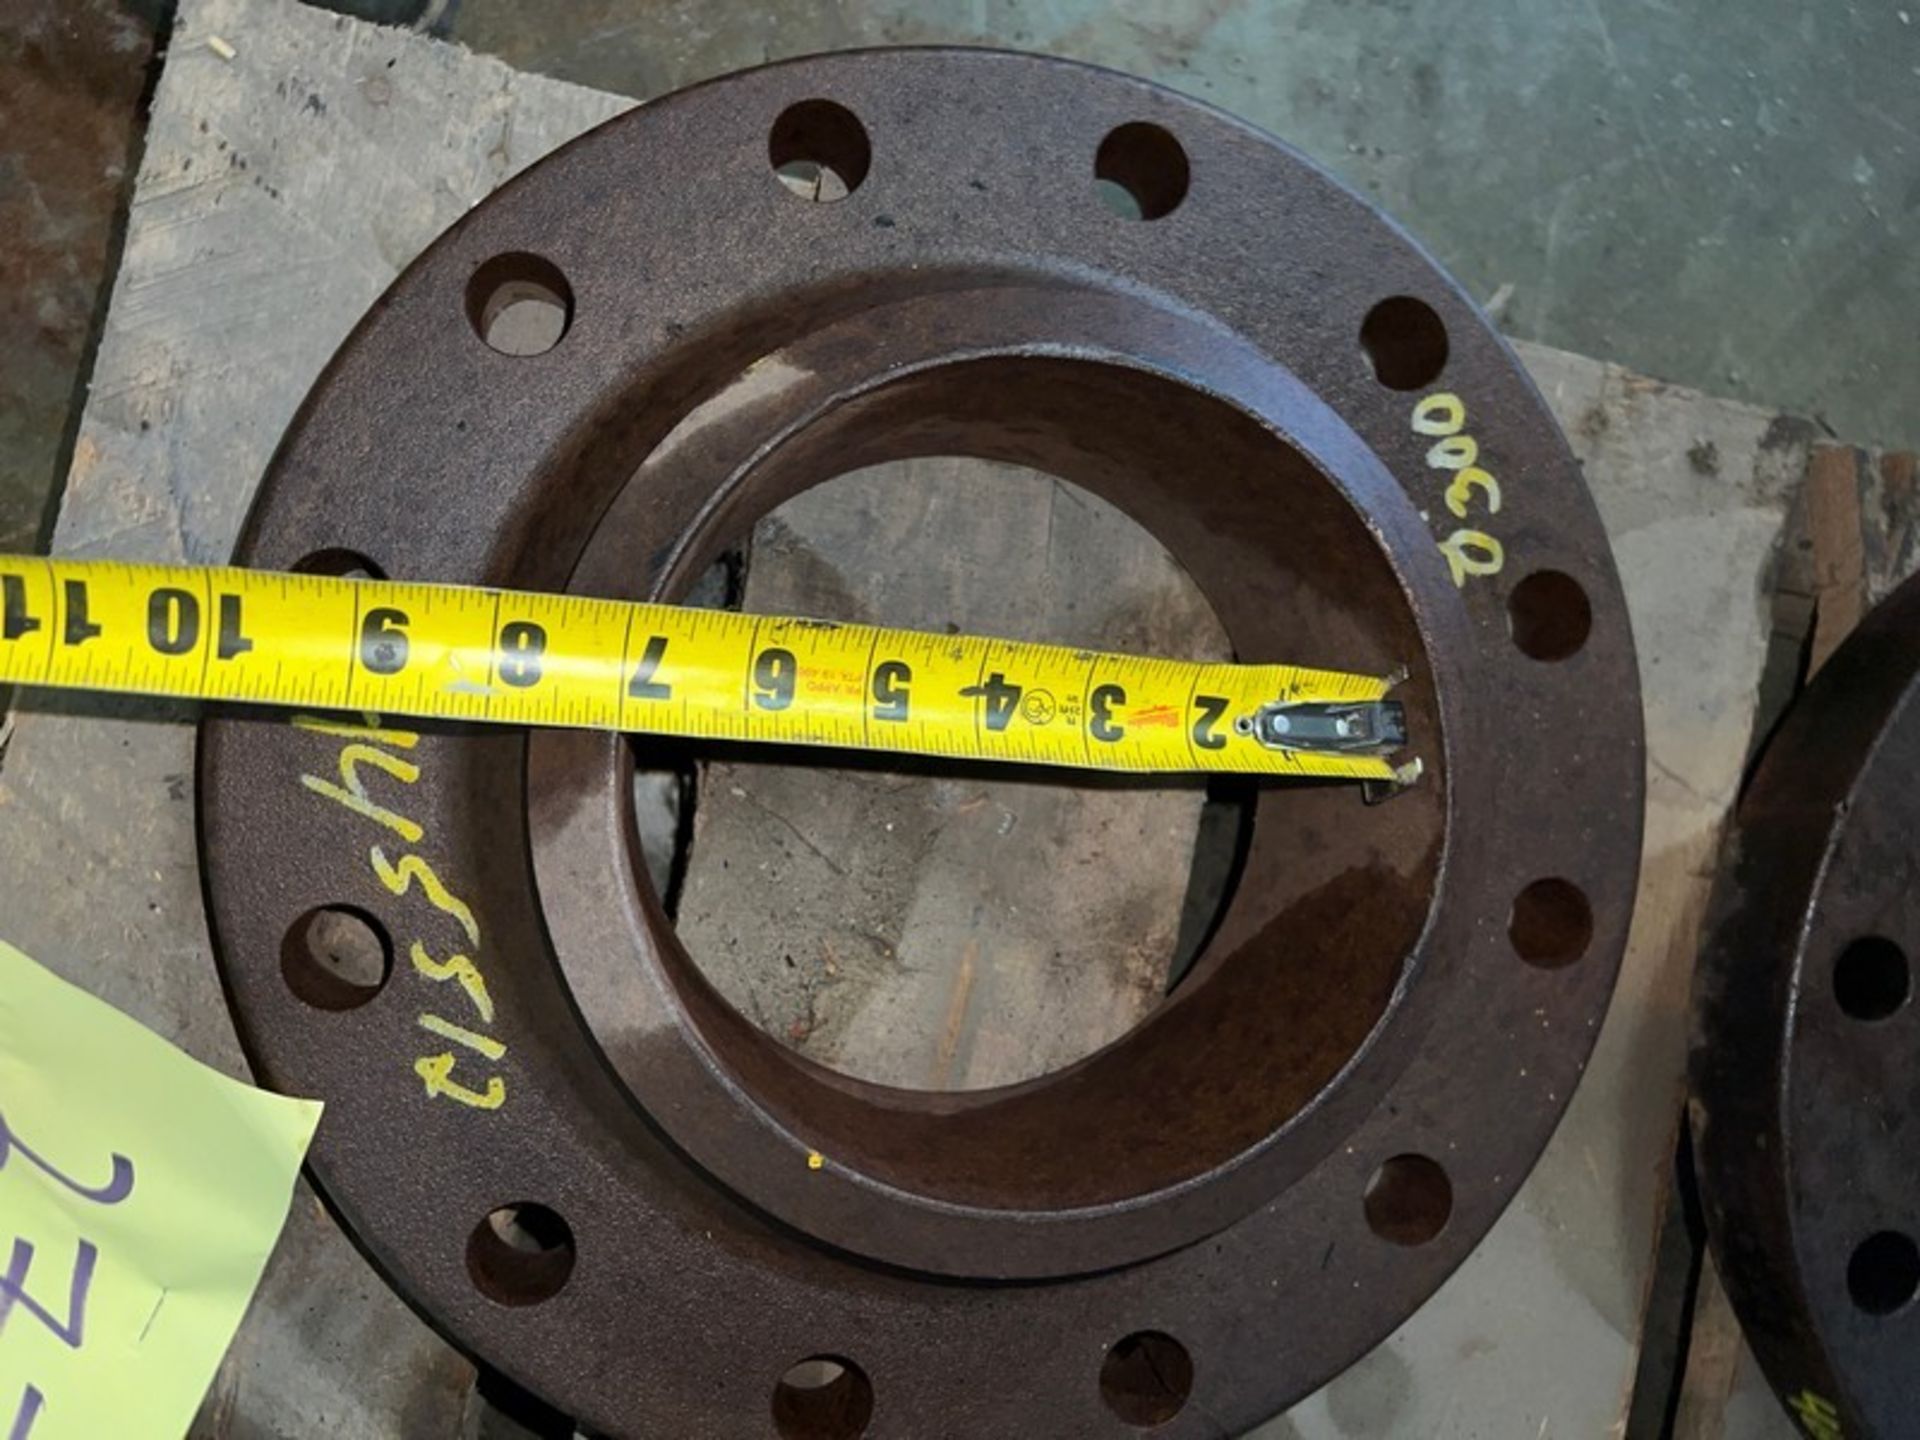 One Lot 4 Iron Pipe Flanges 15" OD, 7" ID, 12 Bolt Holes (RIGGING INCLDED WITH SALE PRICE) --Loading - Image 3 of 3